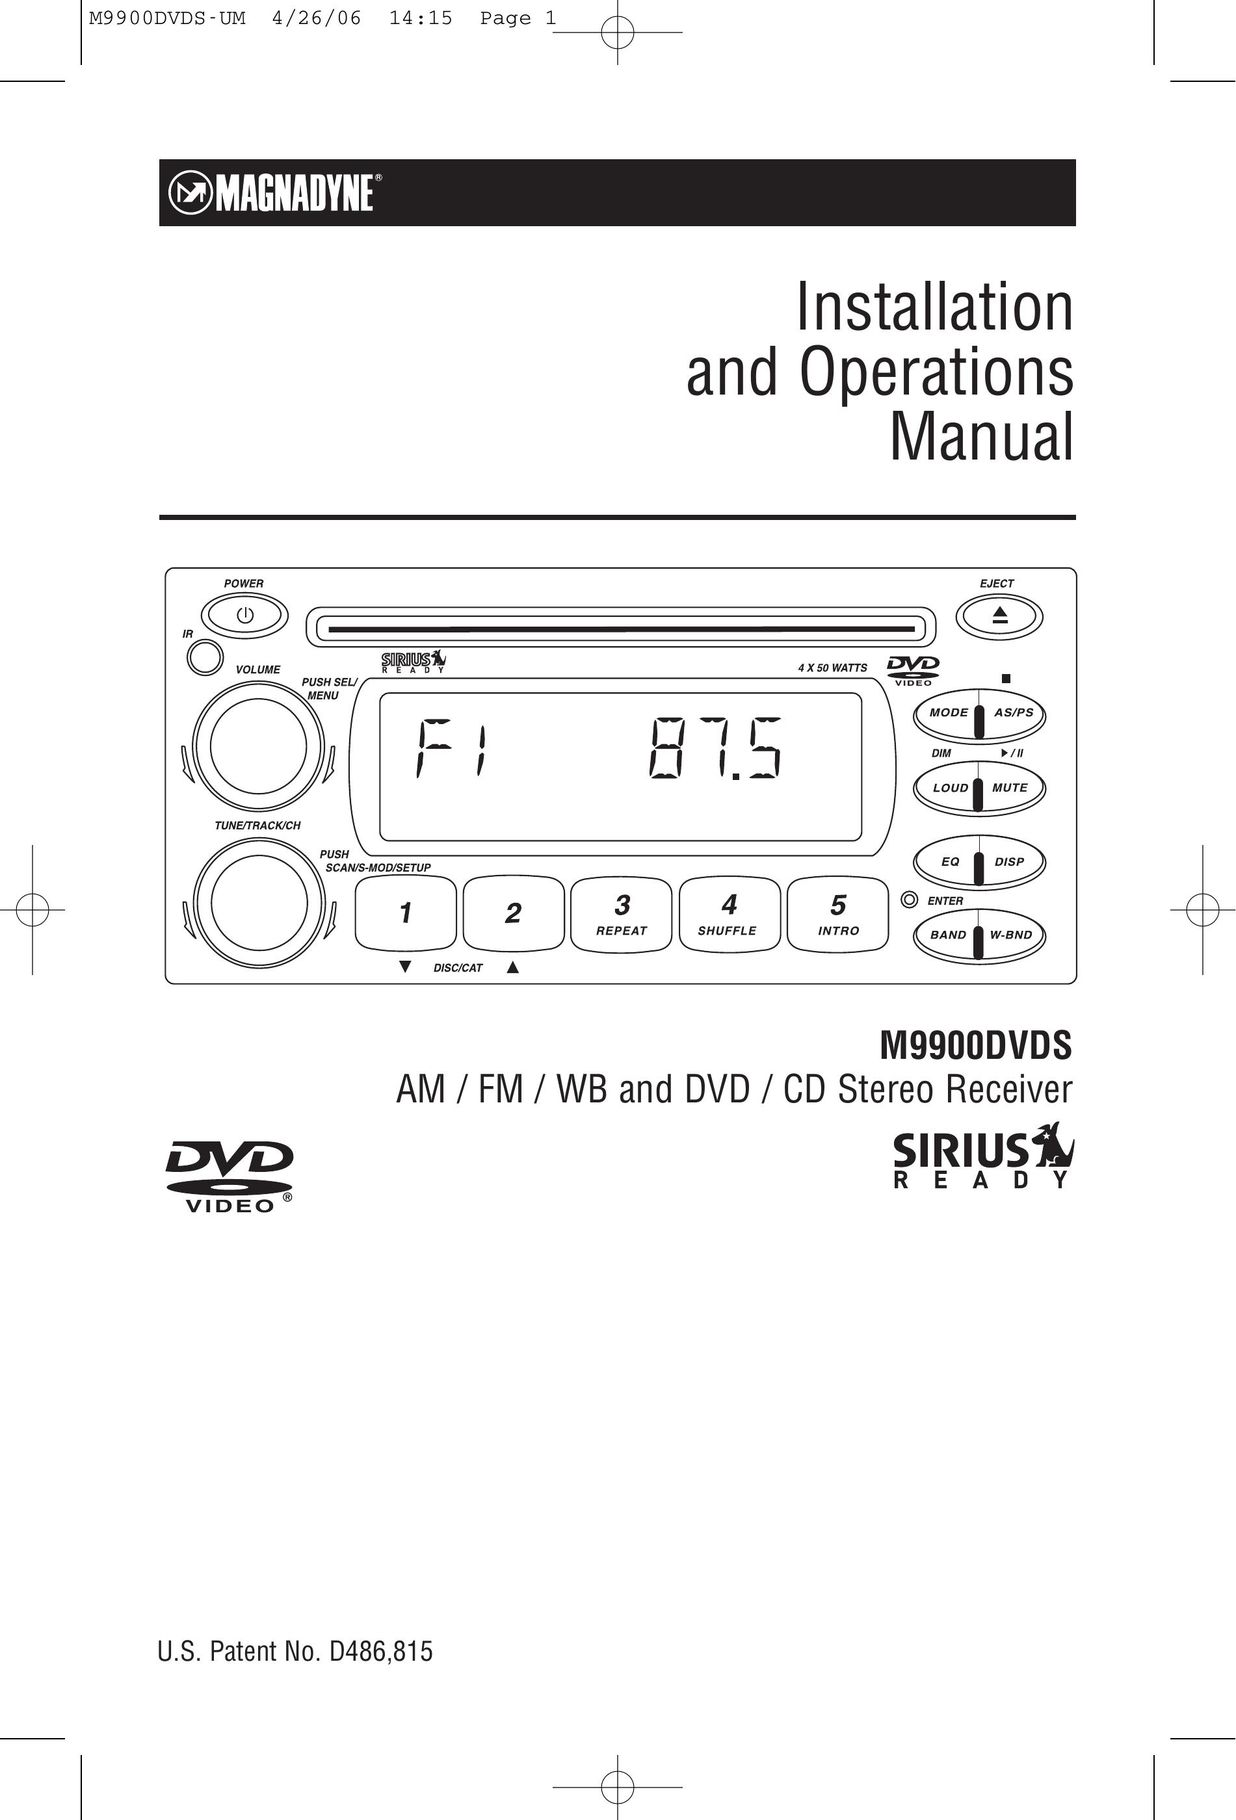 Carbine M9900DVDS Stereo Receiver User Manual